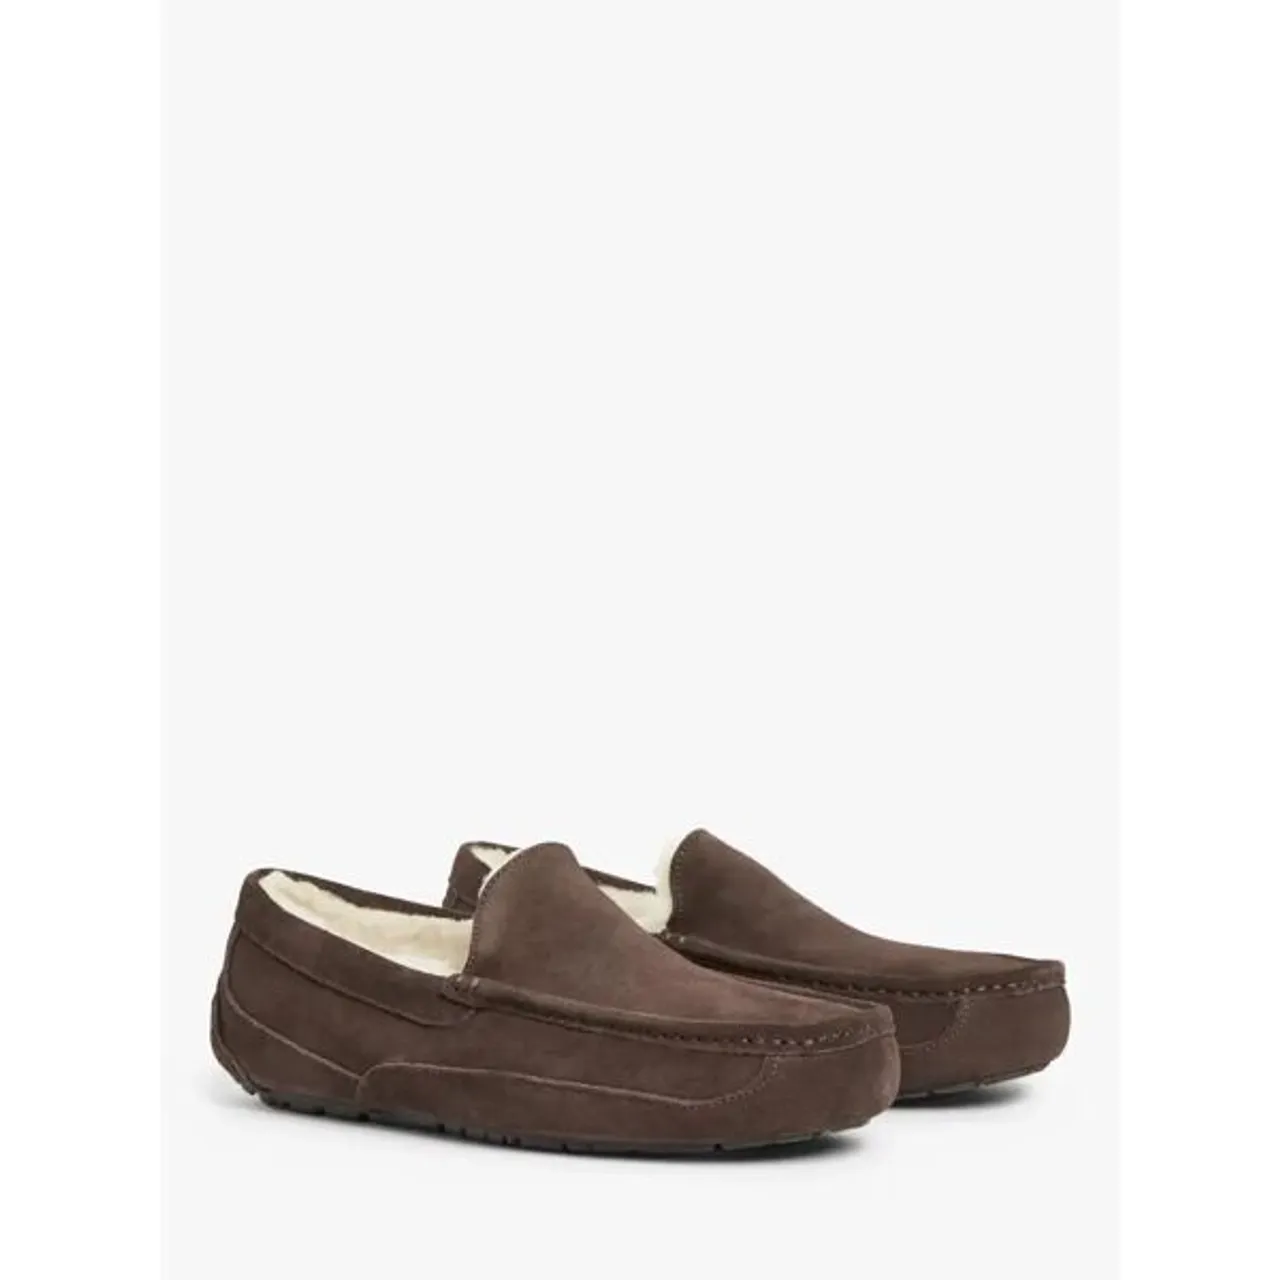 UGG Ascot Moccasin Suede Slippers - Espresso - Male